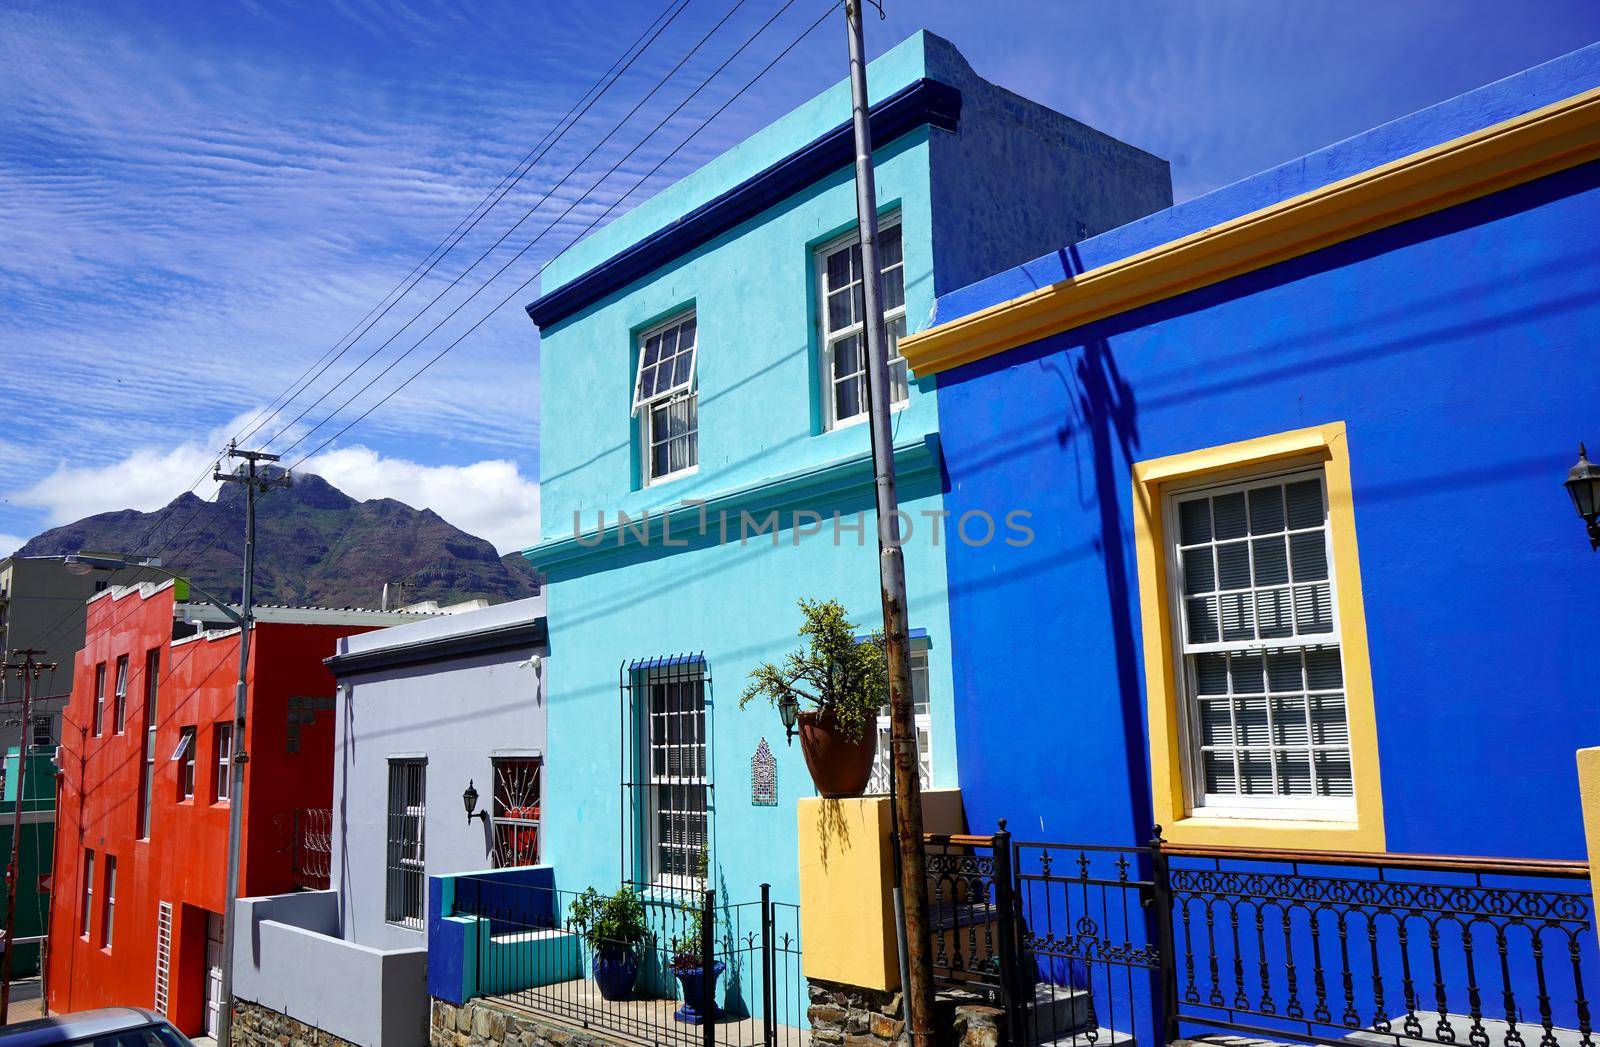 Bo-Kaap district, Cape Town, South Africa - 14 December 2021 : Distinctive bright houses in the bo-kaap district of Cape Town, South Africa by fivepointsix